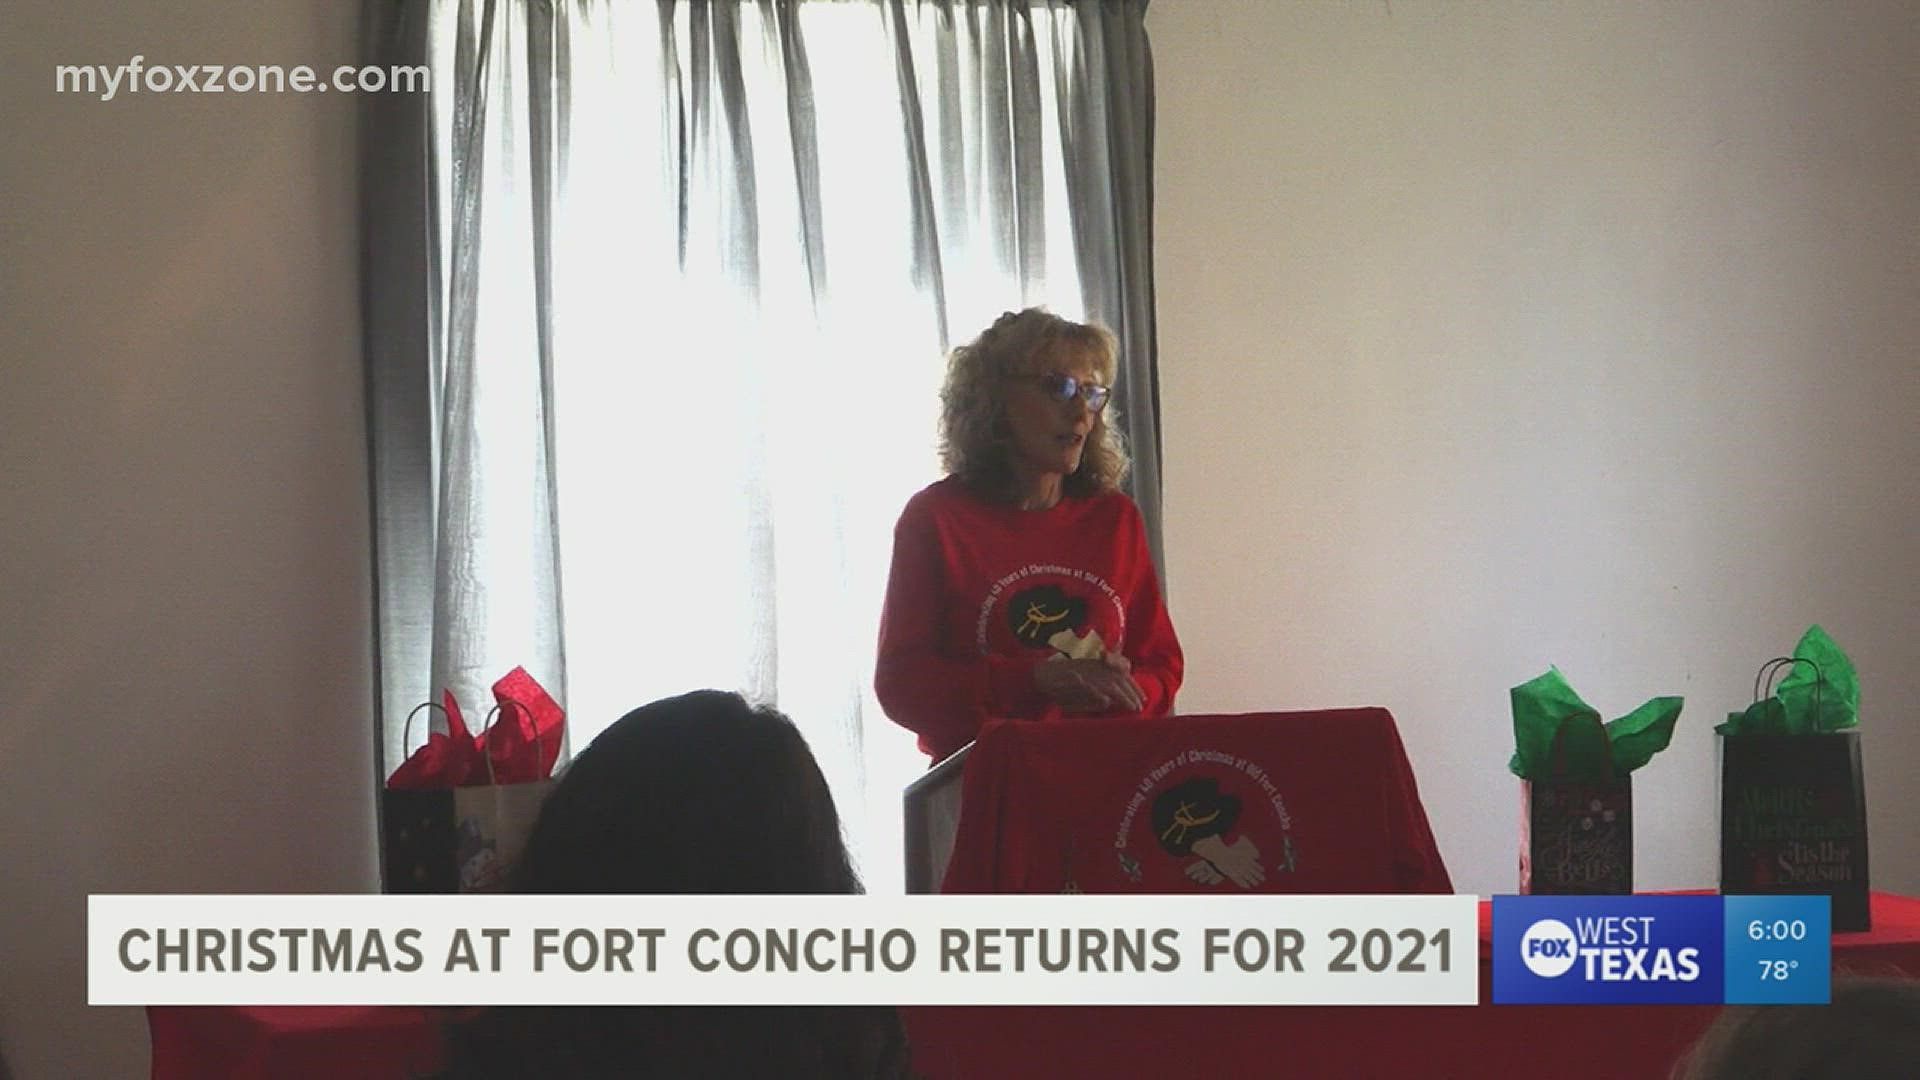 Christmas at Old Fort Concho returns next month after last year's cancelation because of COVID-19.